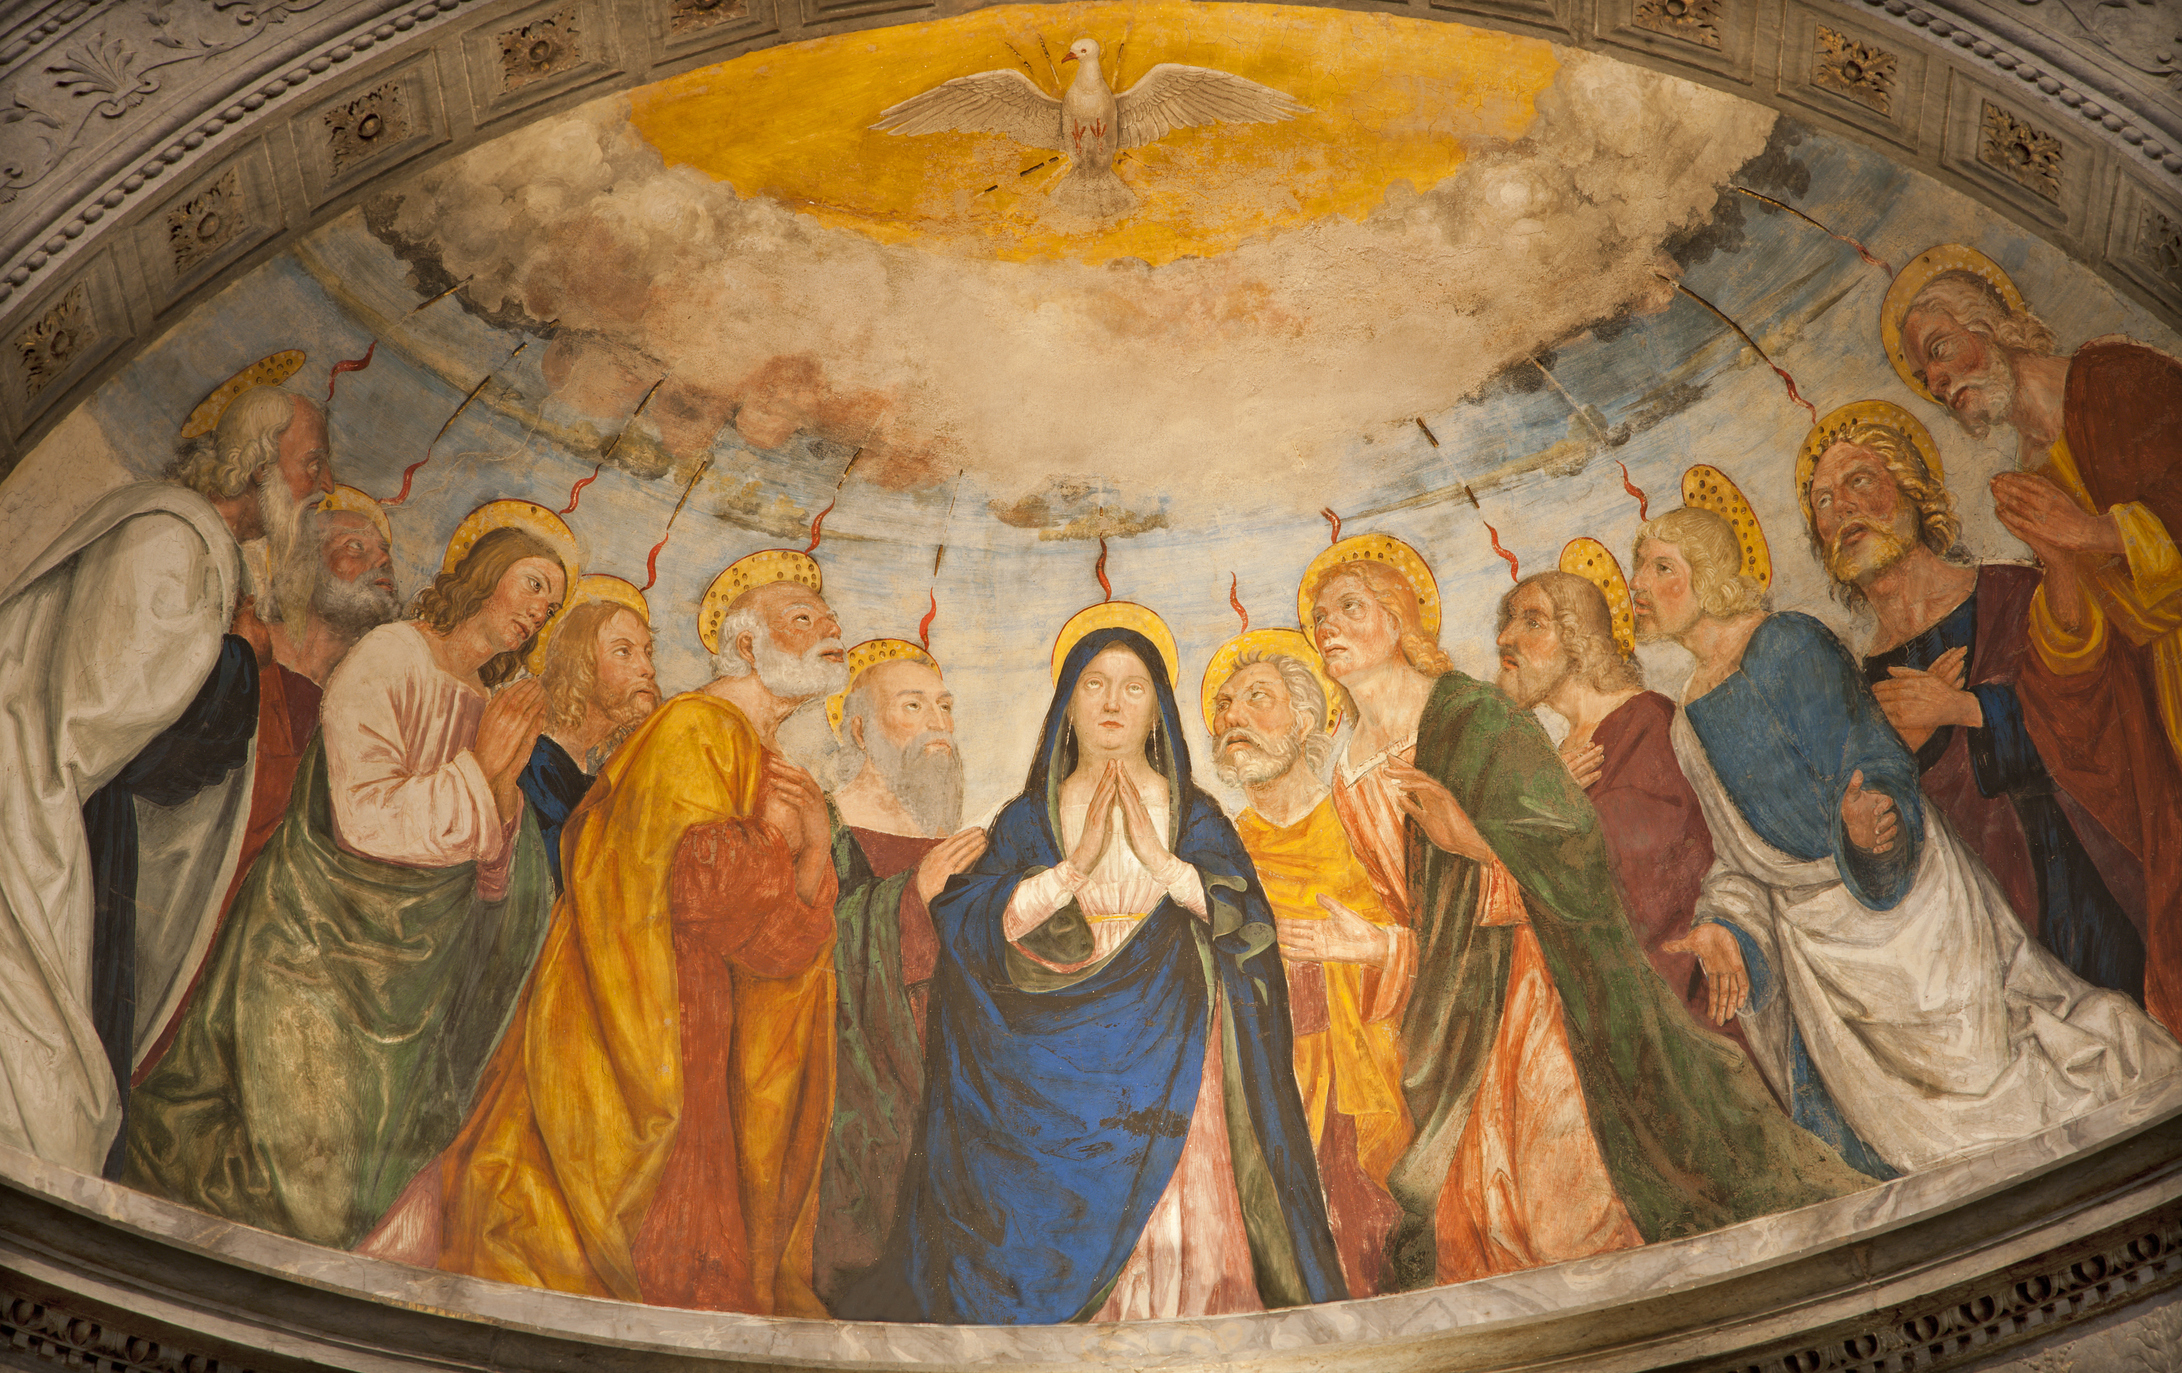 The descent of the Holy Spirt on the Apostles and Mary in the Upper Room